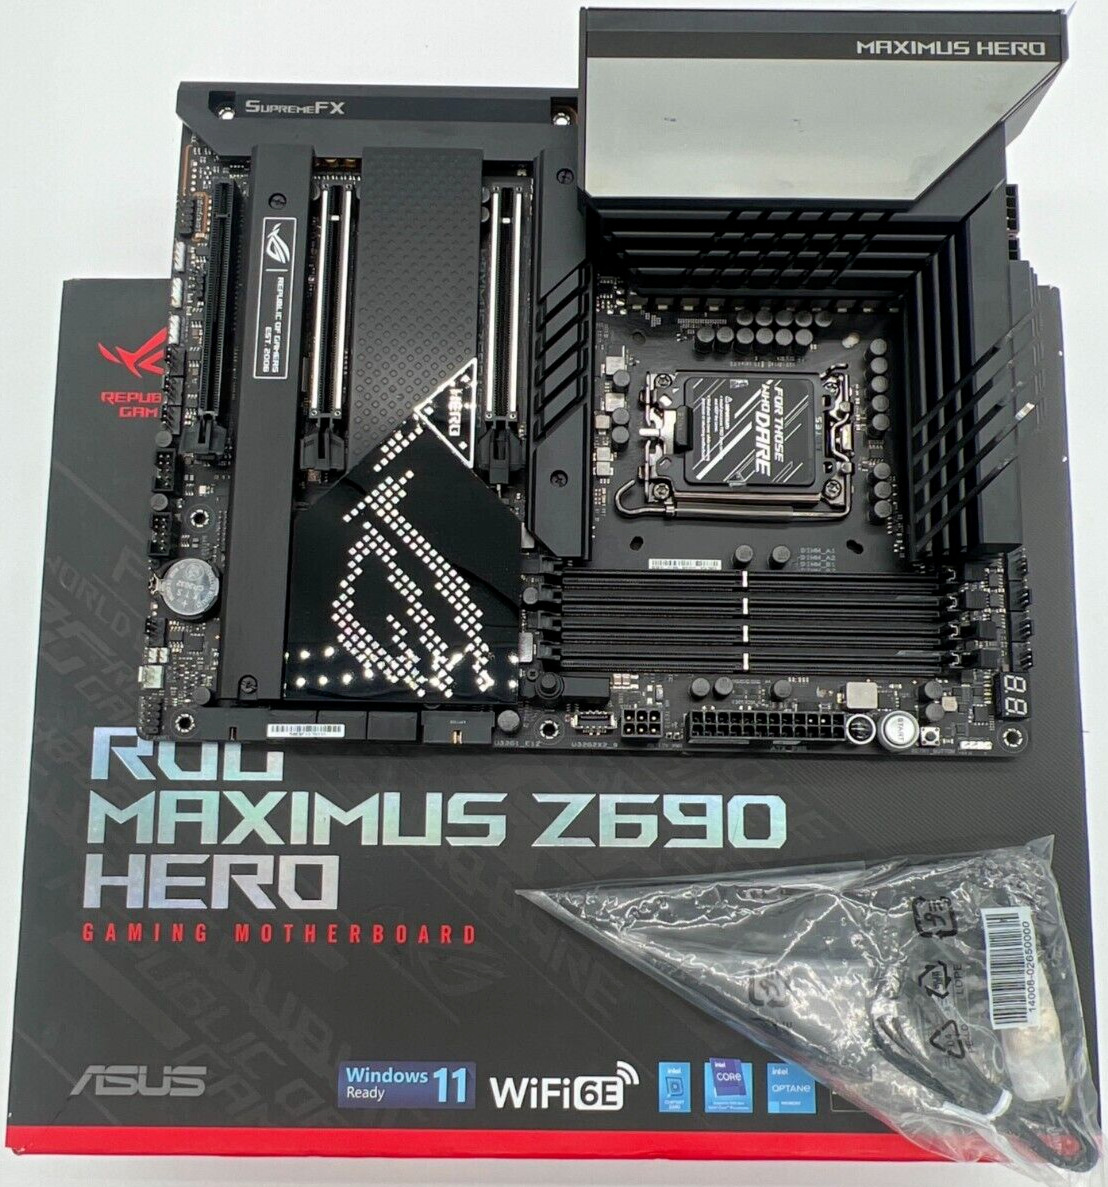 ASUS ROG Maximus Z690 Hero ATX Motherboard - NOT AFFECTED BY RECALL